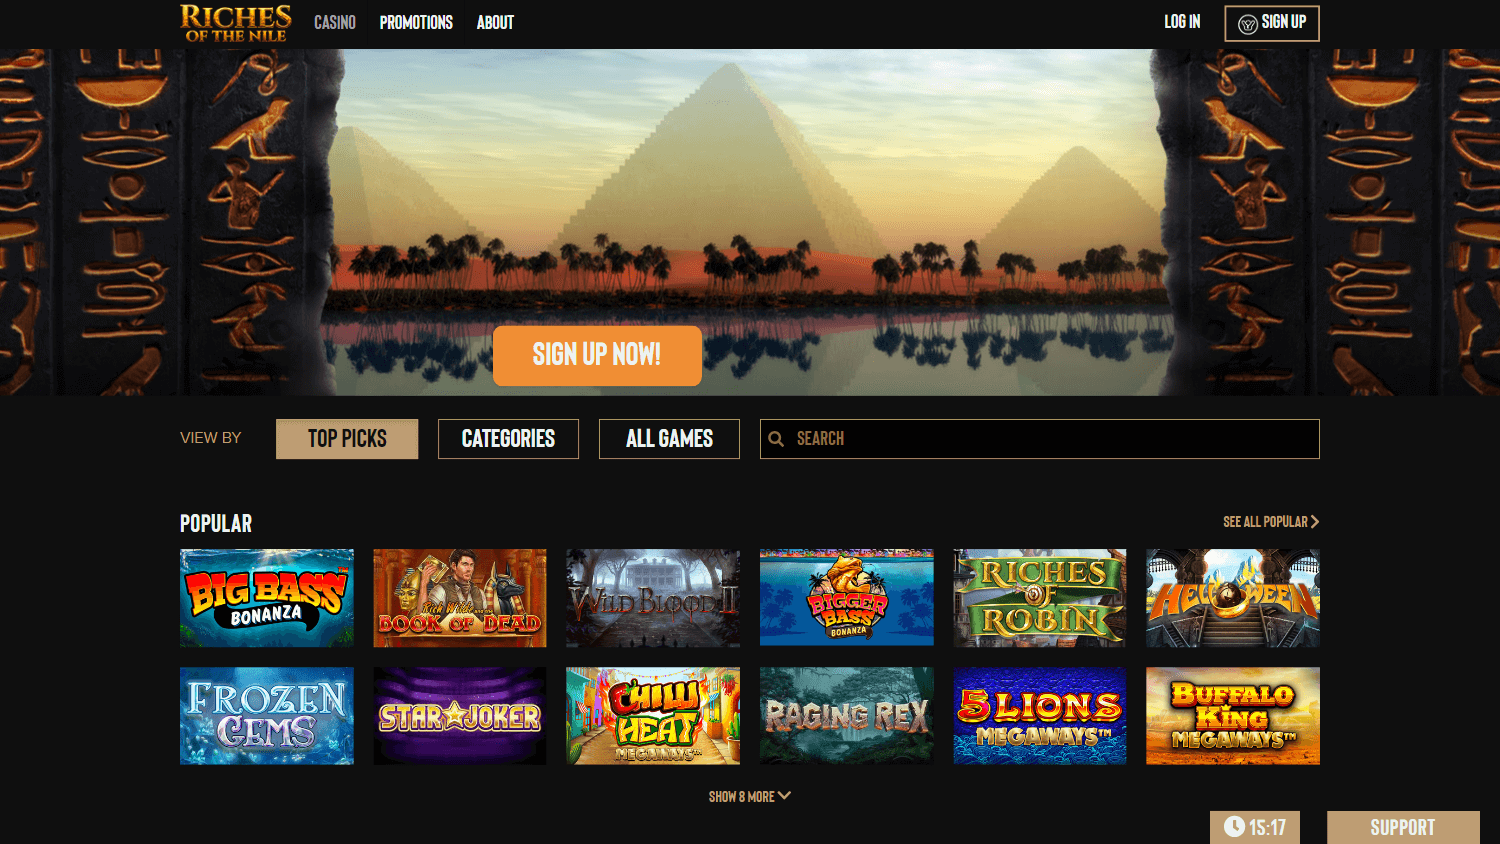 riches_of_the_nile_casino_homepage_desktop